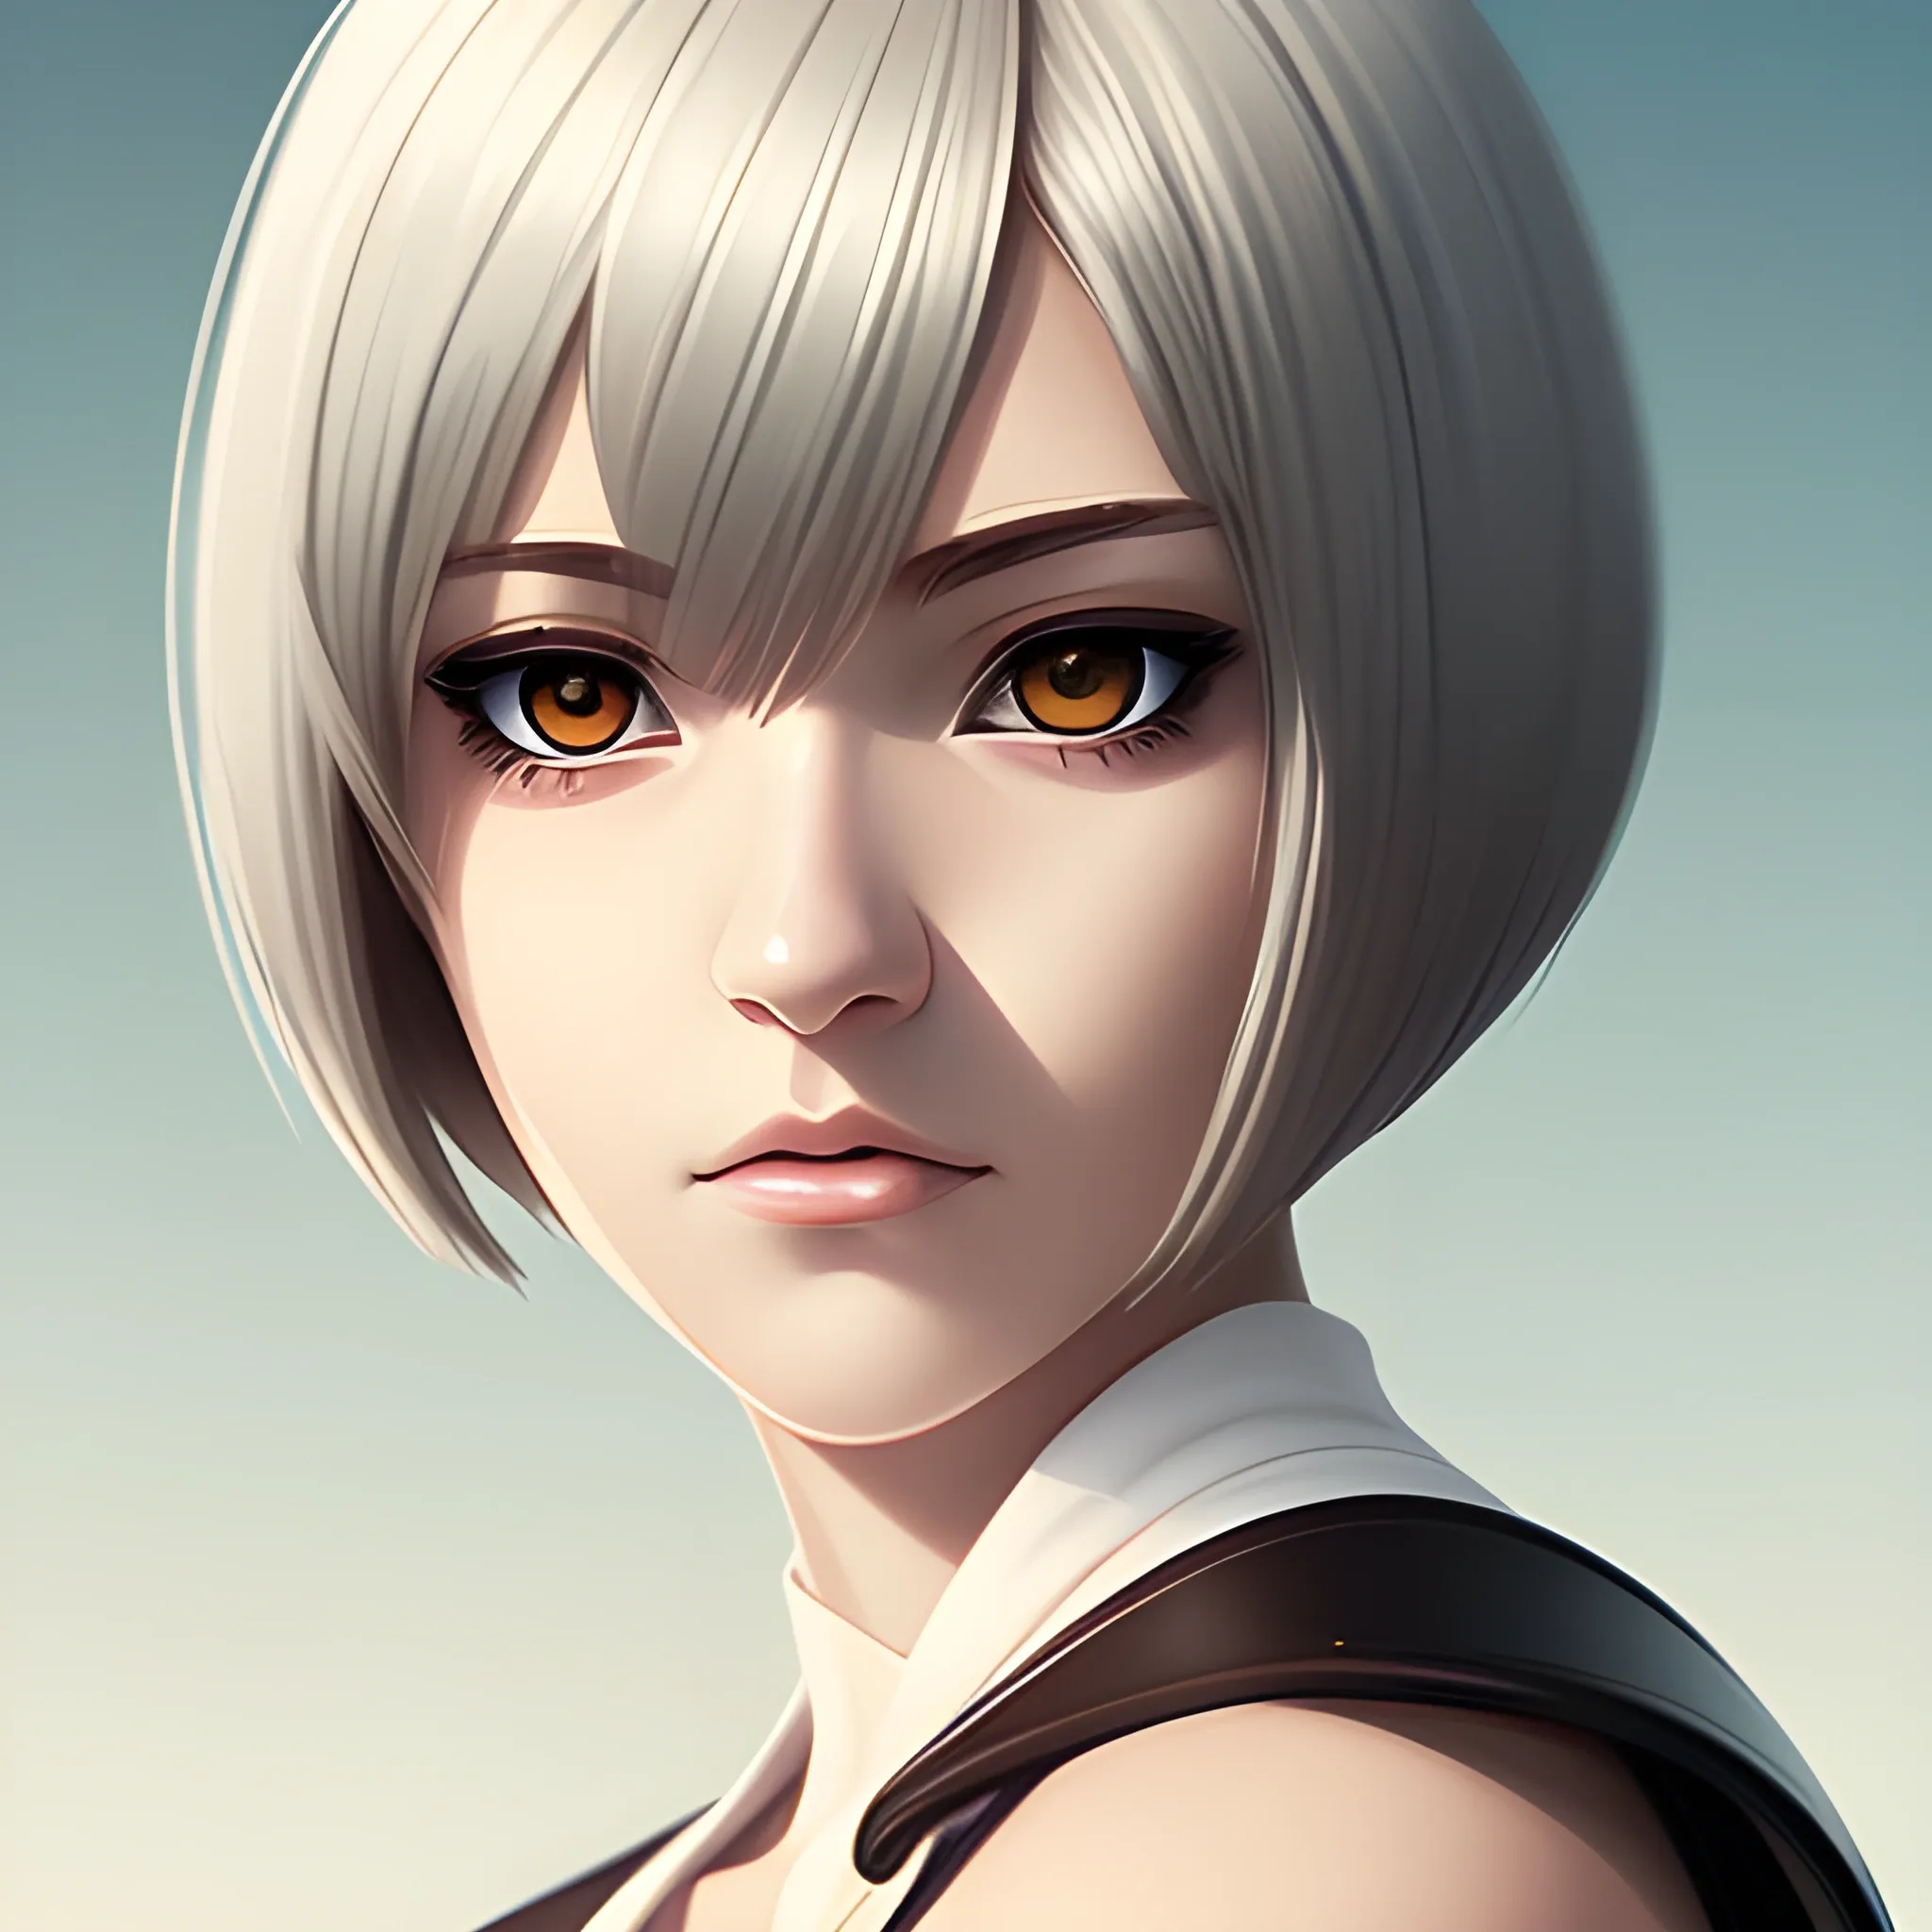 Woman, white clothes with brown borders, warrior, anime, detail, bob cut hair, half body portraits, anime style
